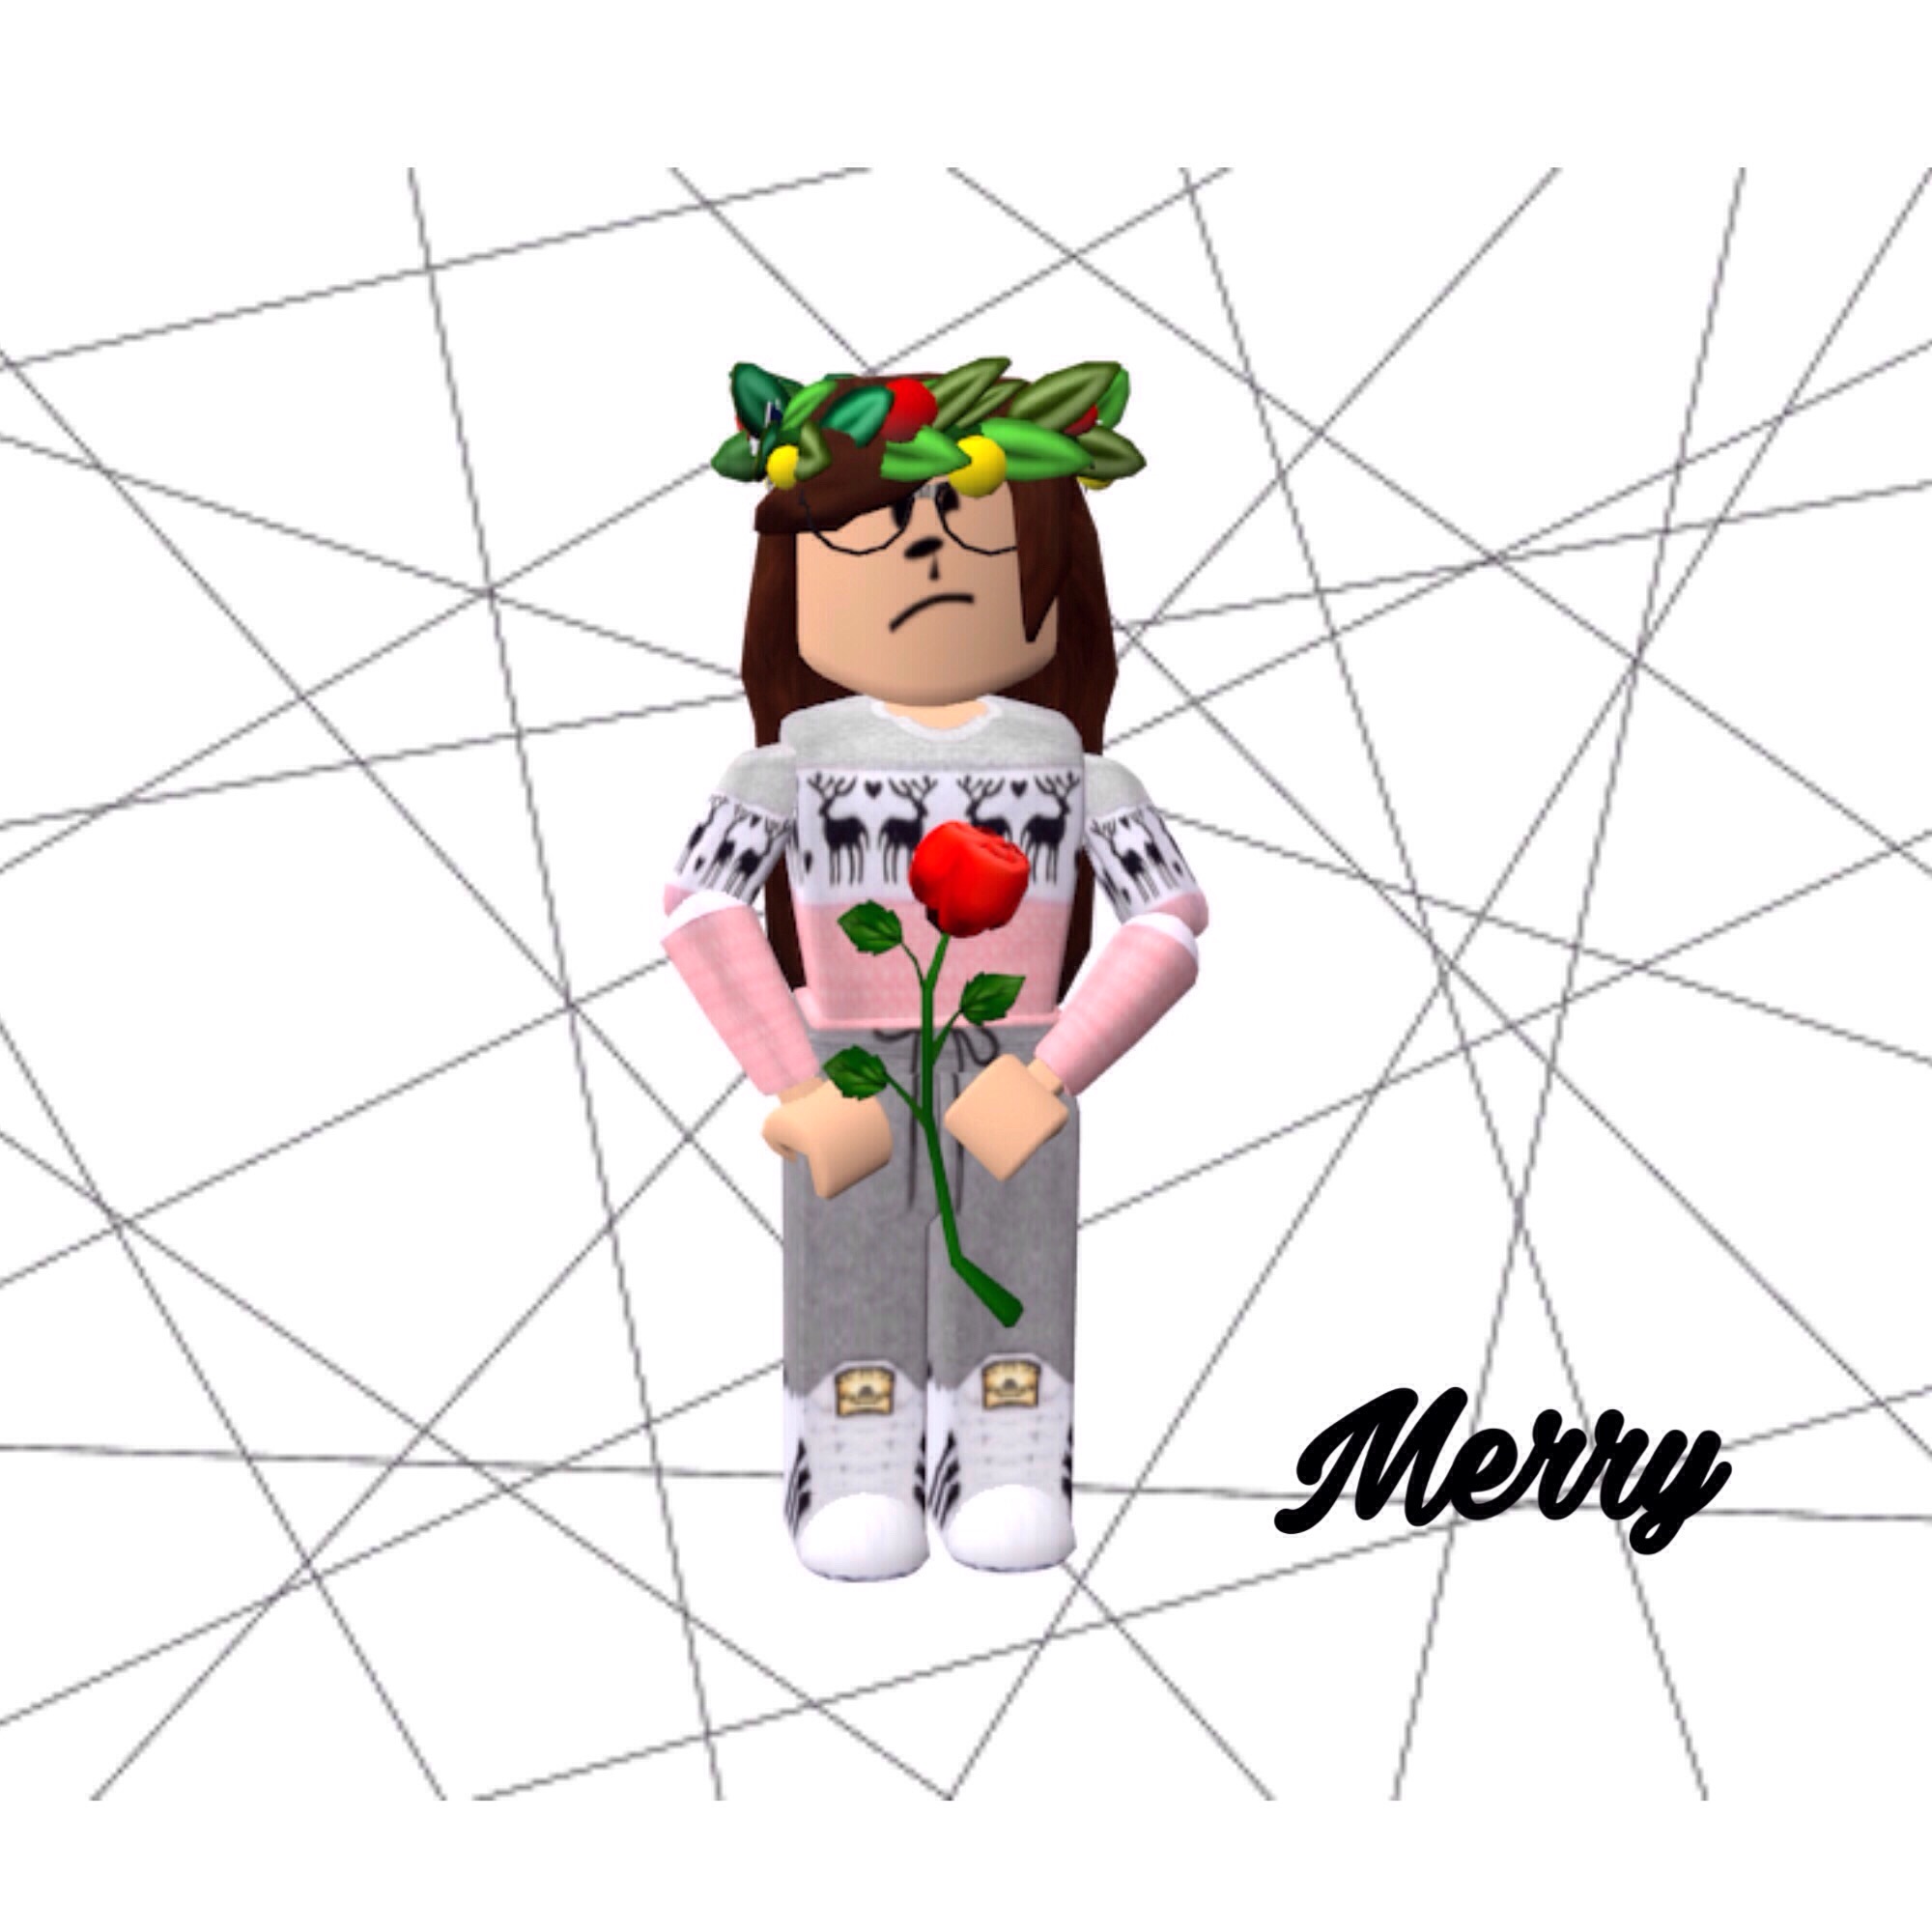 Roblox Robloxgfx Gfx Blender Image By Merry - roblox blender tutorial